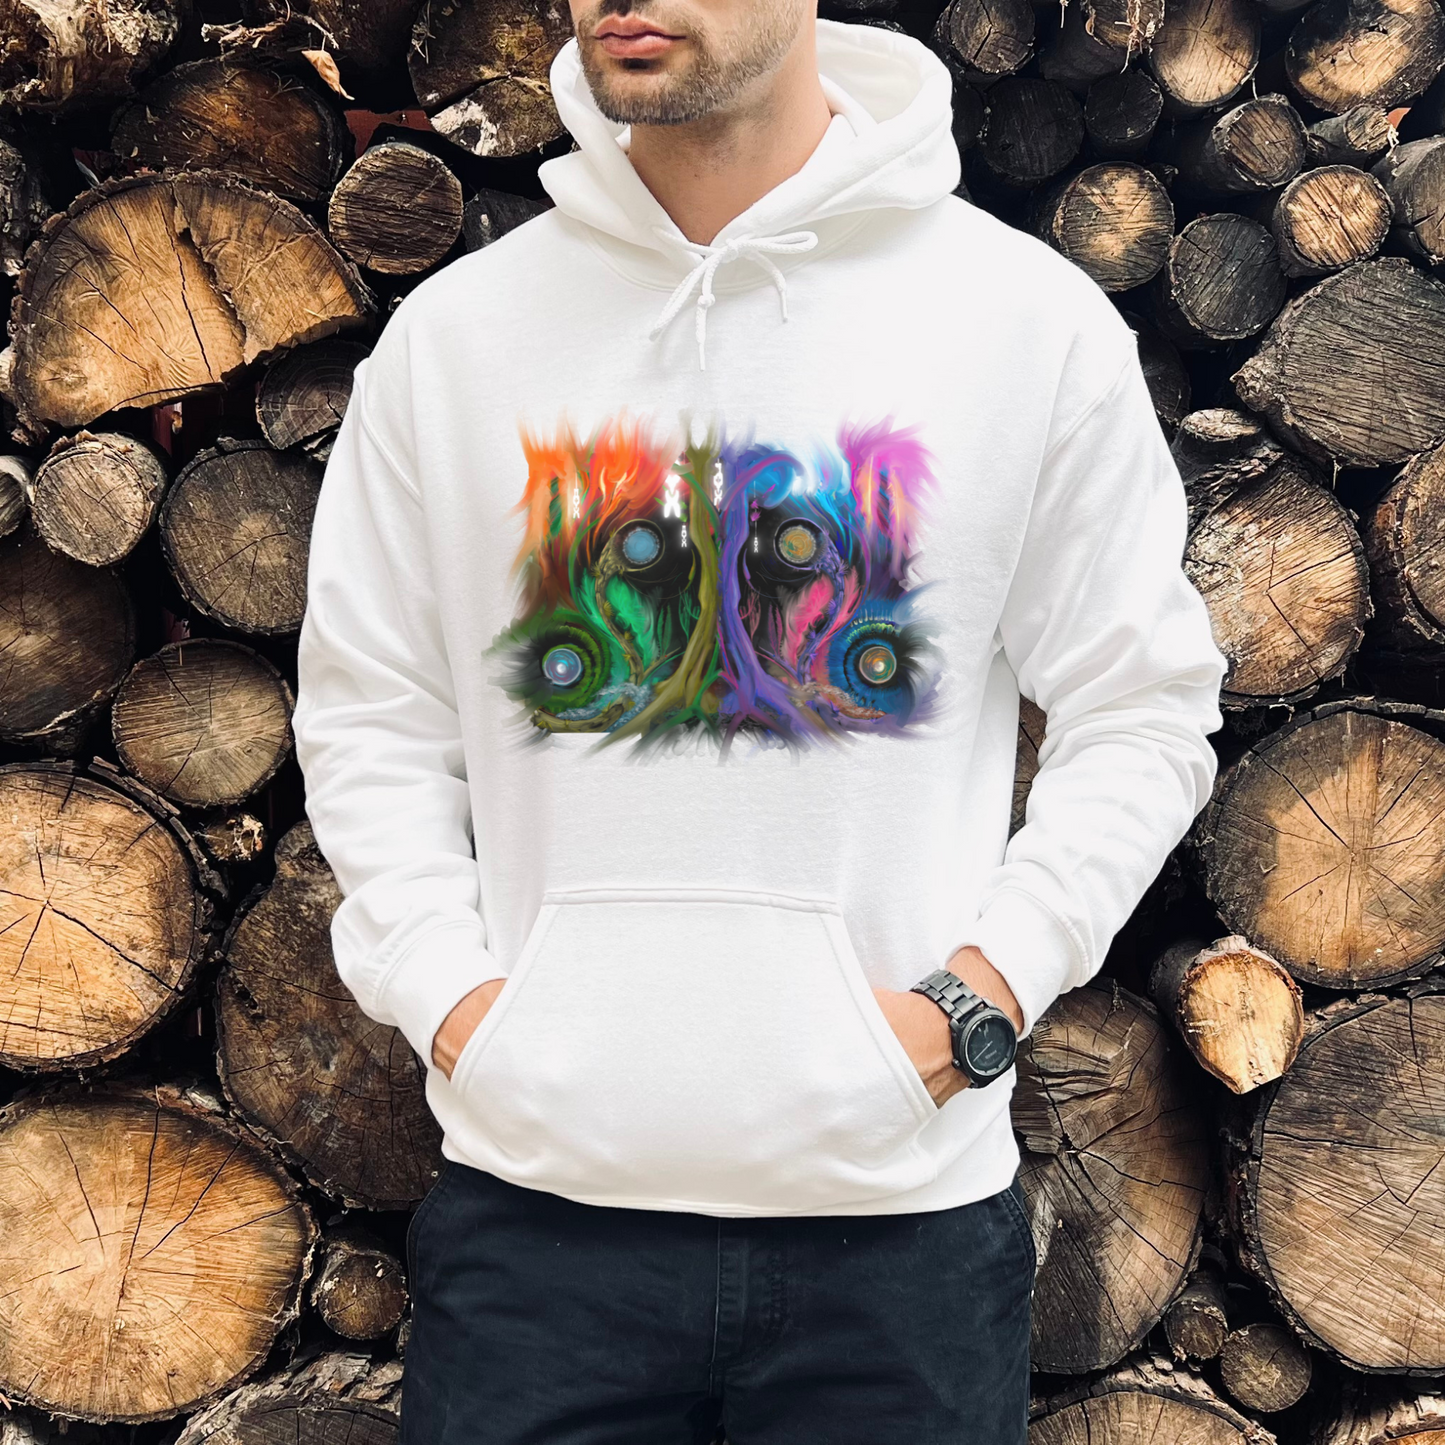 Deep In The Forest of Illusions Unisex Hooded Sweatshirt